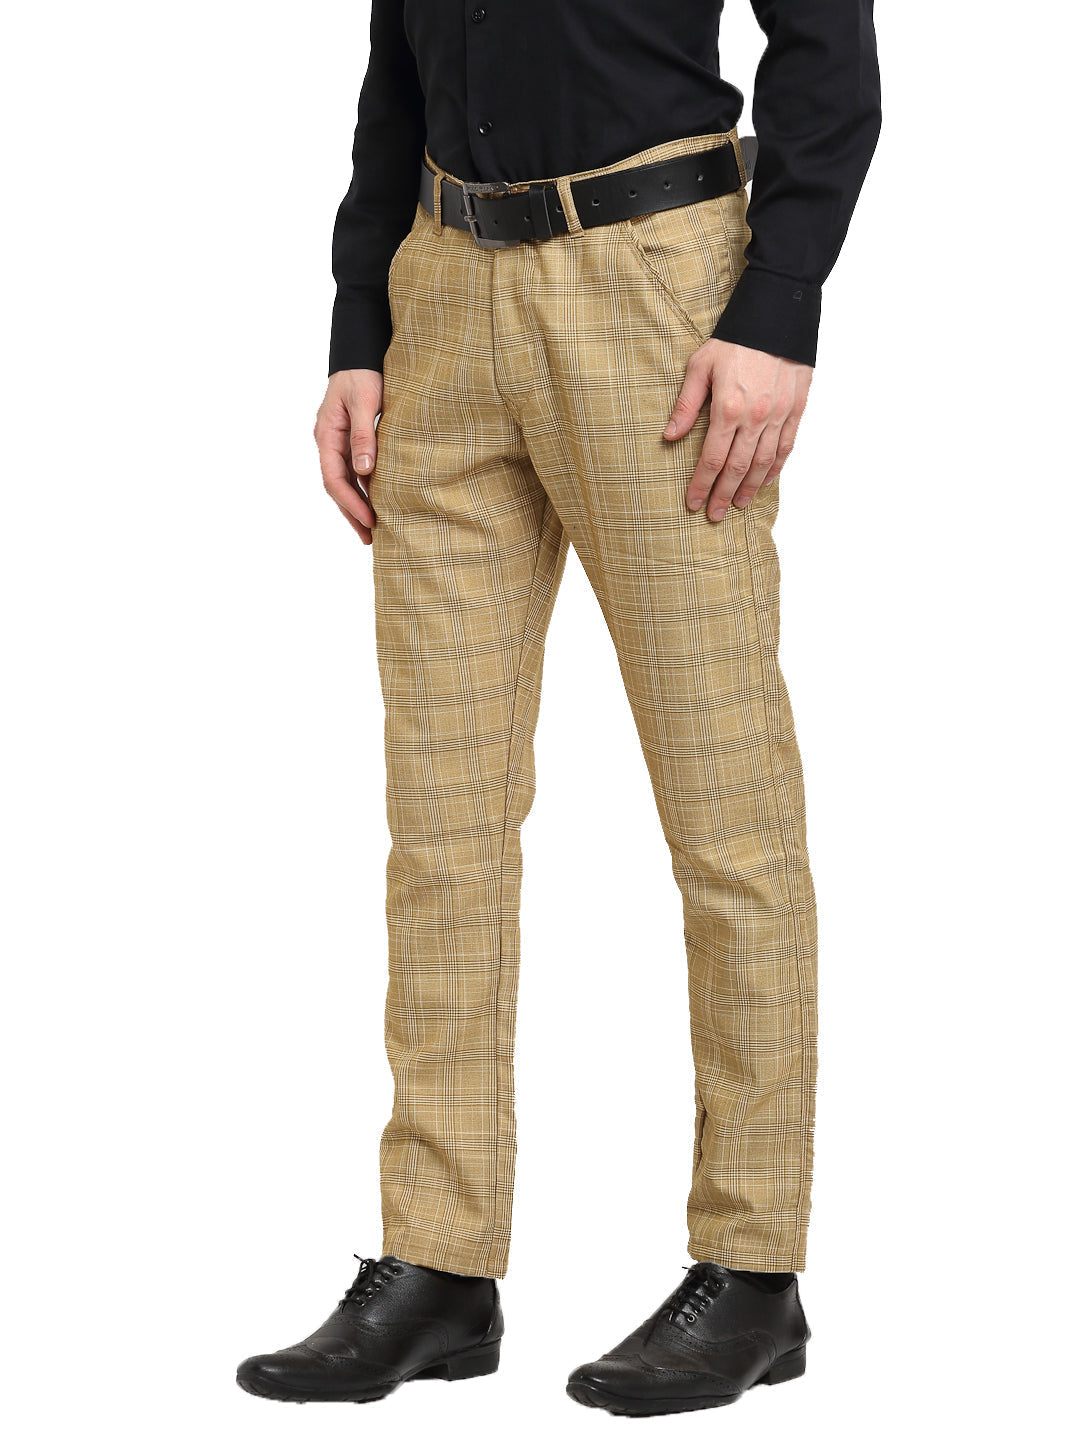 Royal Blue Check Cotton Trousers For Men | Maarss.com